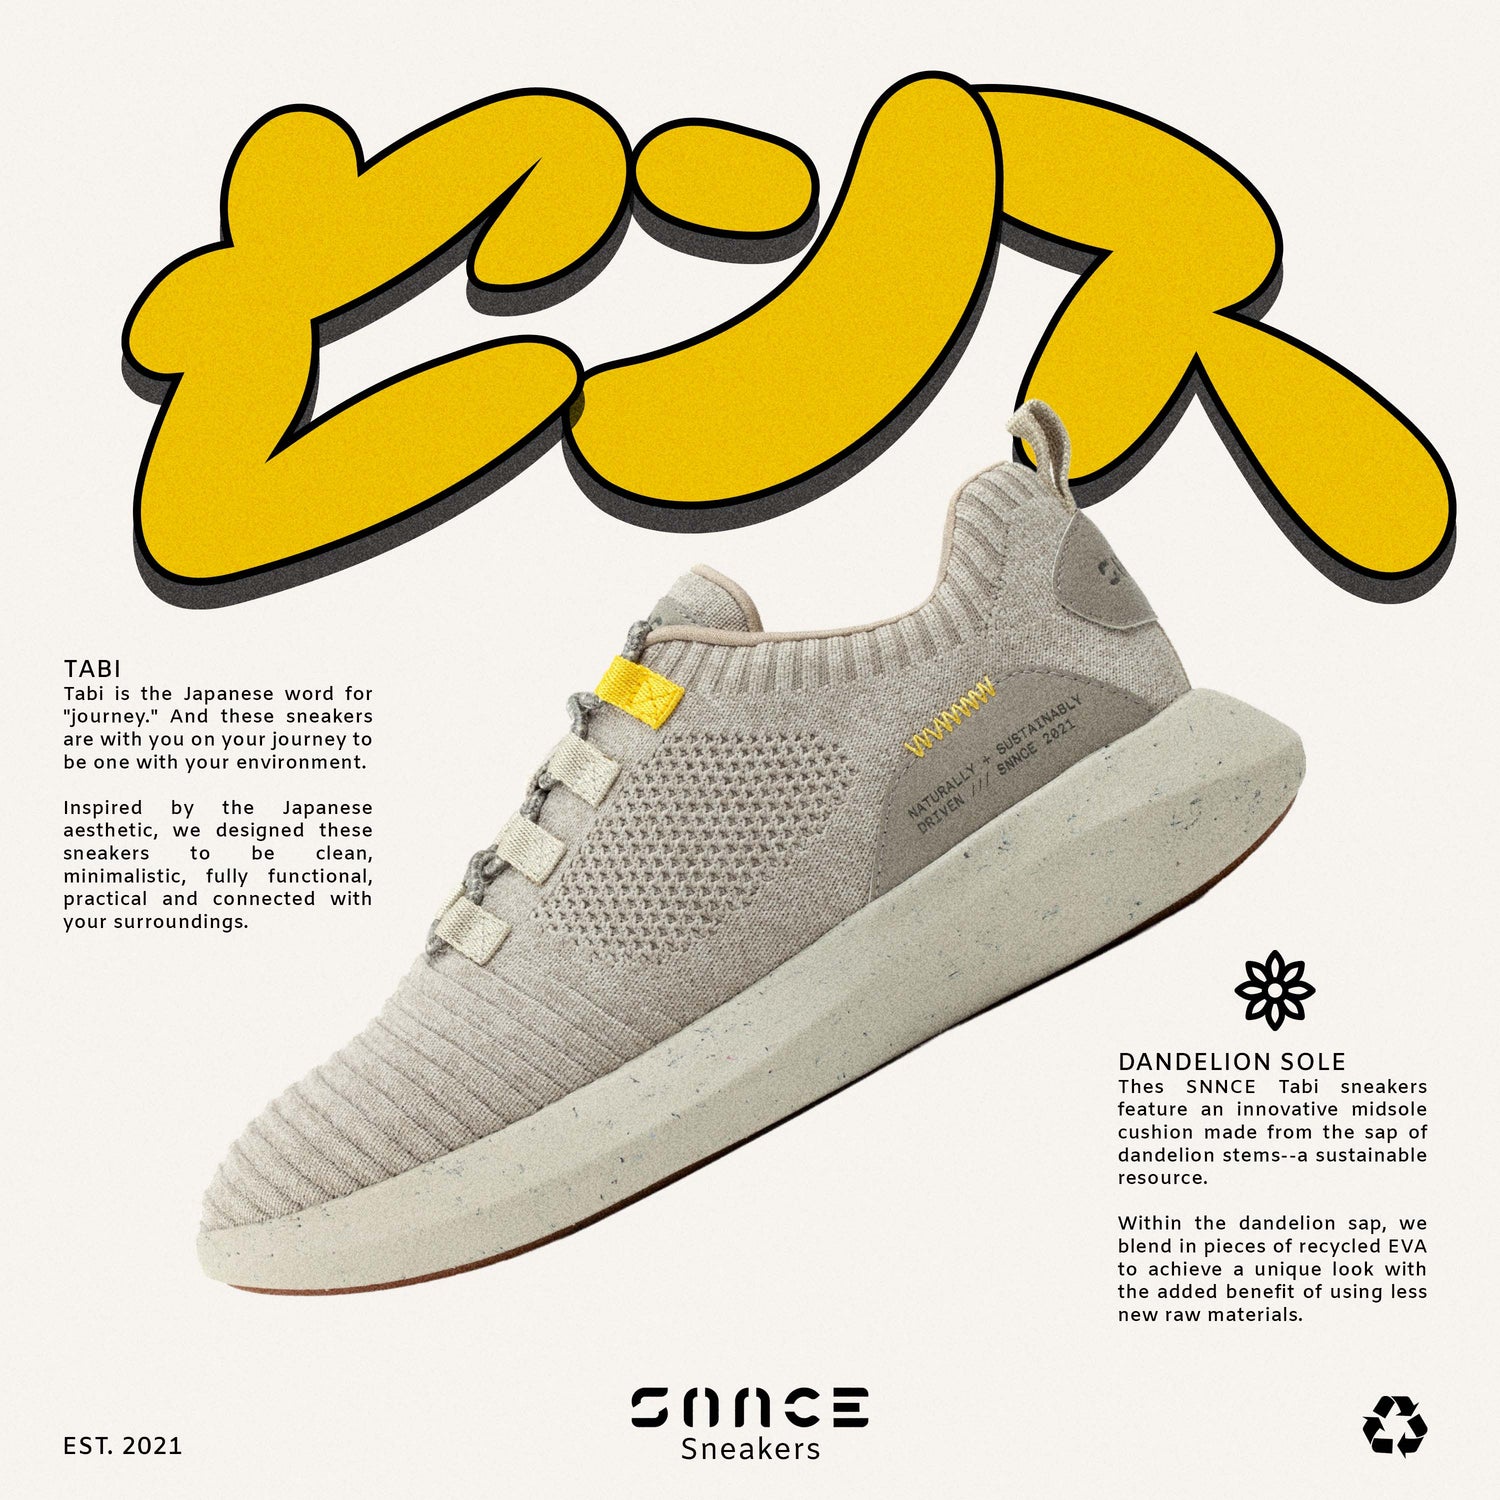 Retro style image of SNNCE Sneakers with bubble text of the word SNNCE in Japanese